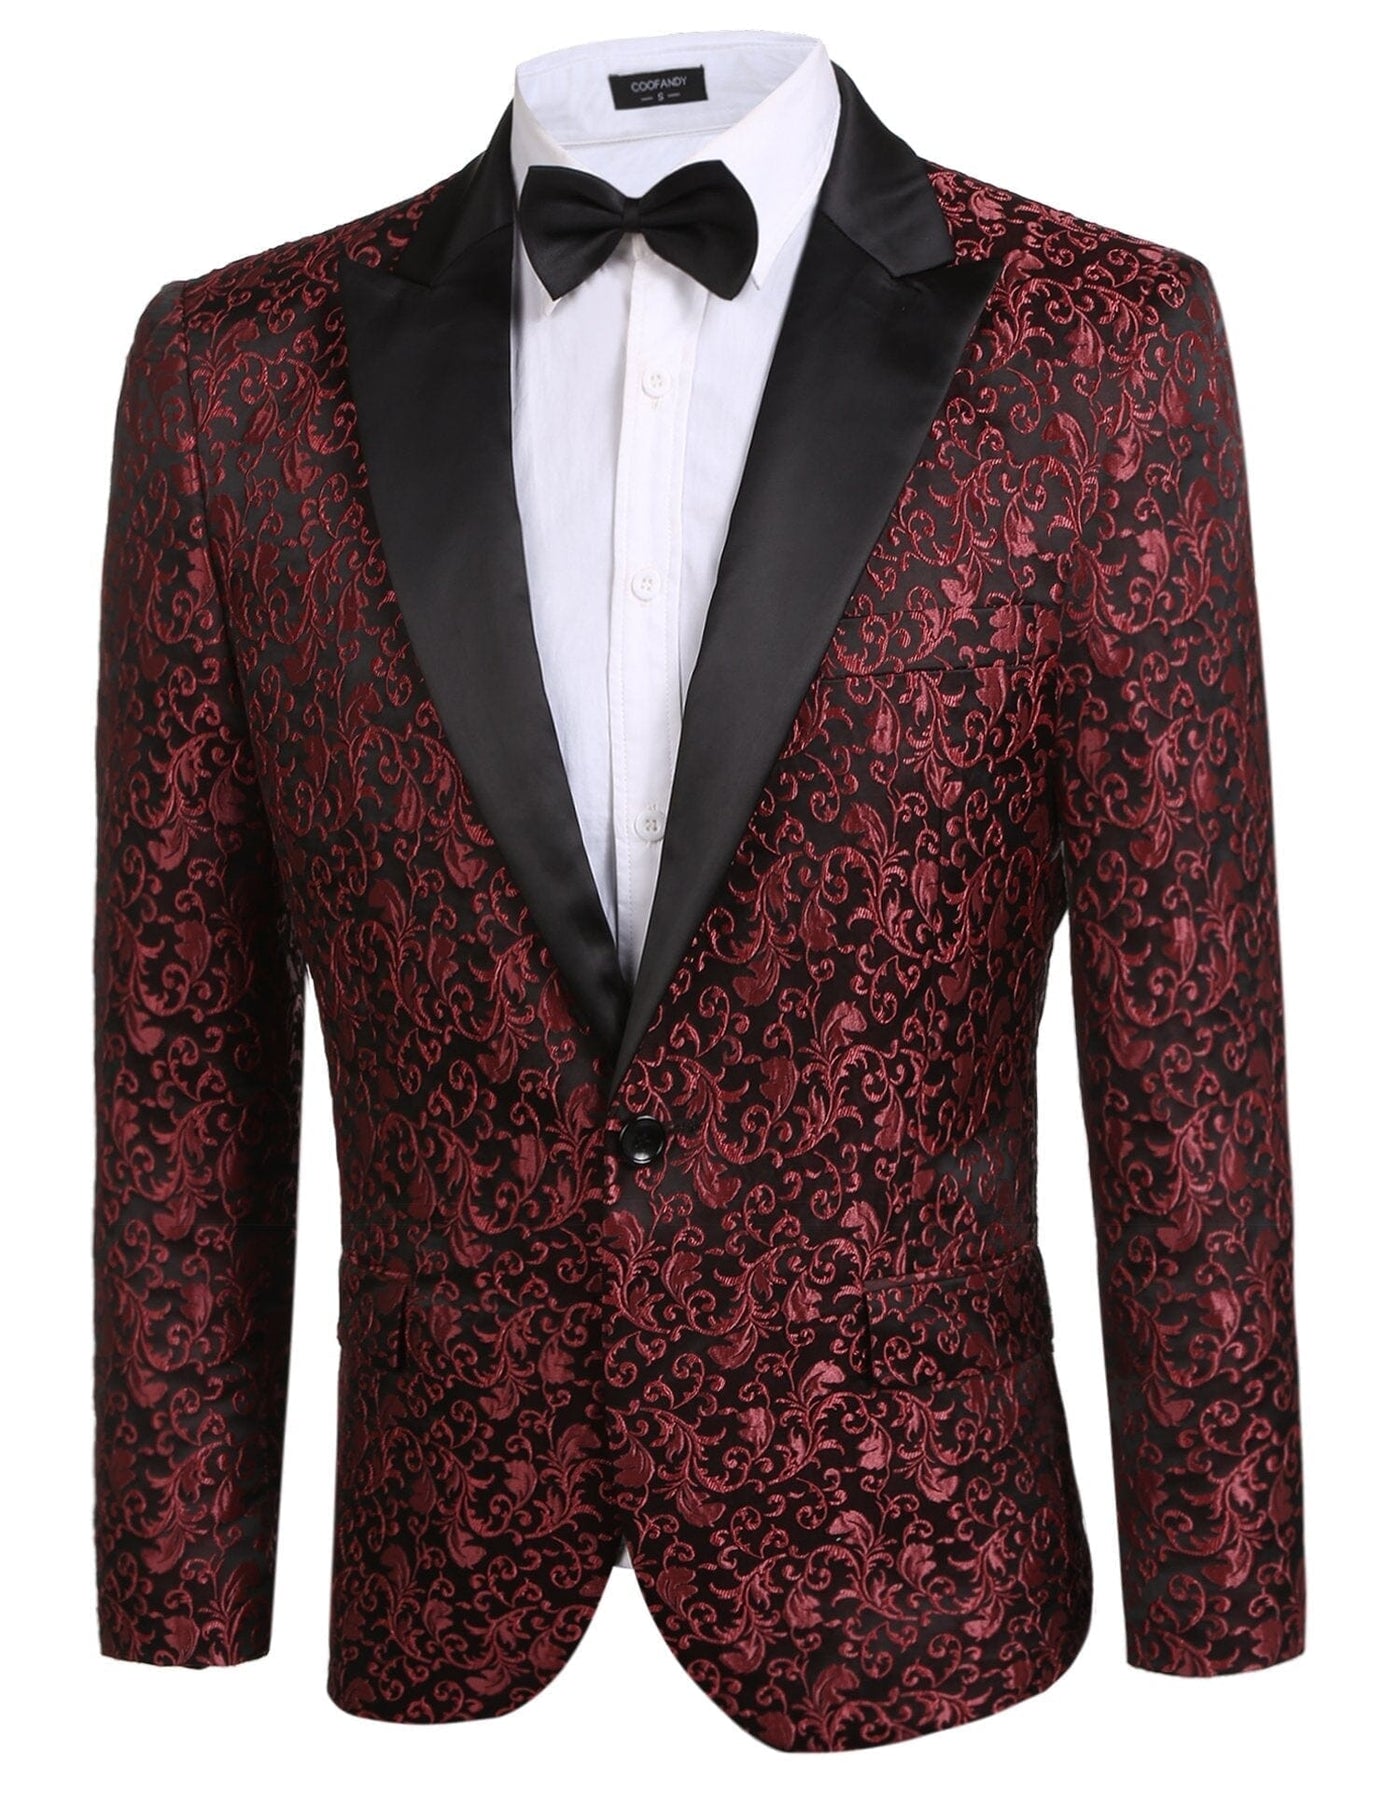 Coofandy Floral Party Tuxedo (US Only) Blazer coofandy 